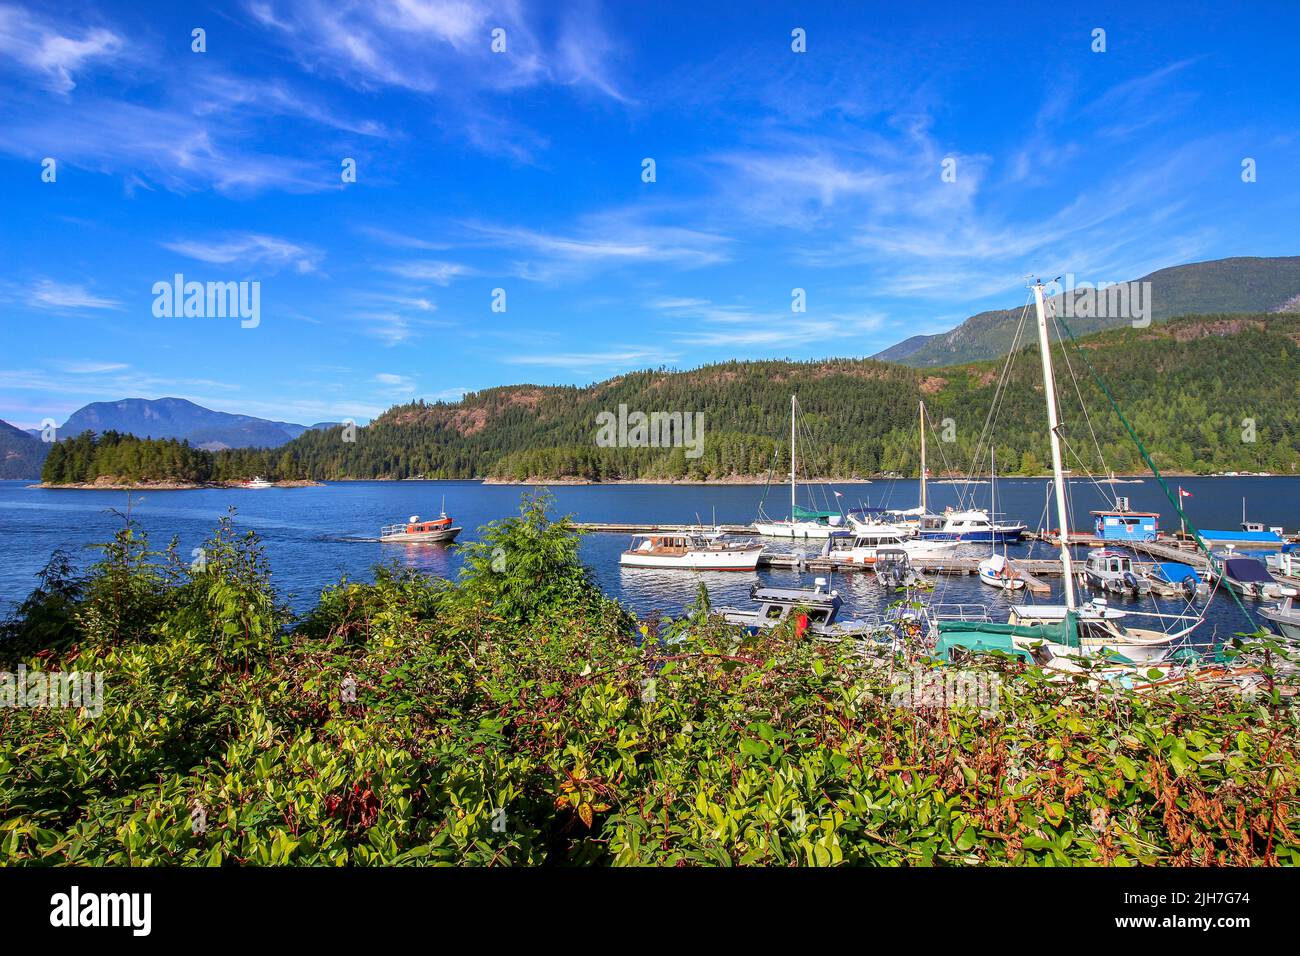 Powell River, BC - the view on the harbor with white sail boats surrounded by lush nature. Stock Photo